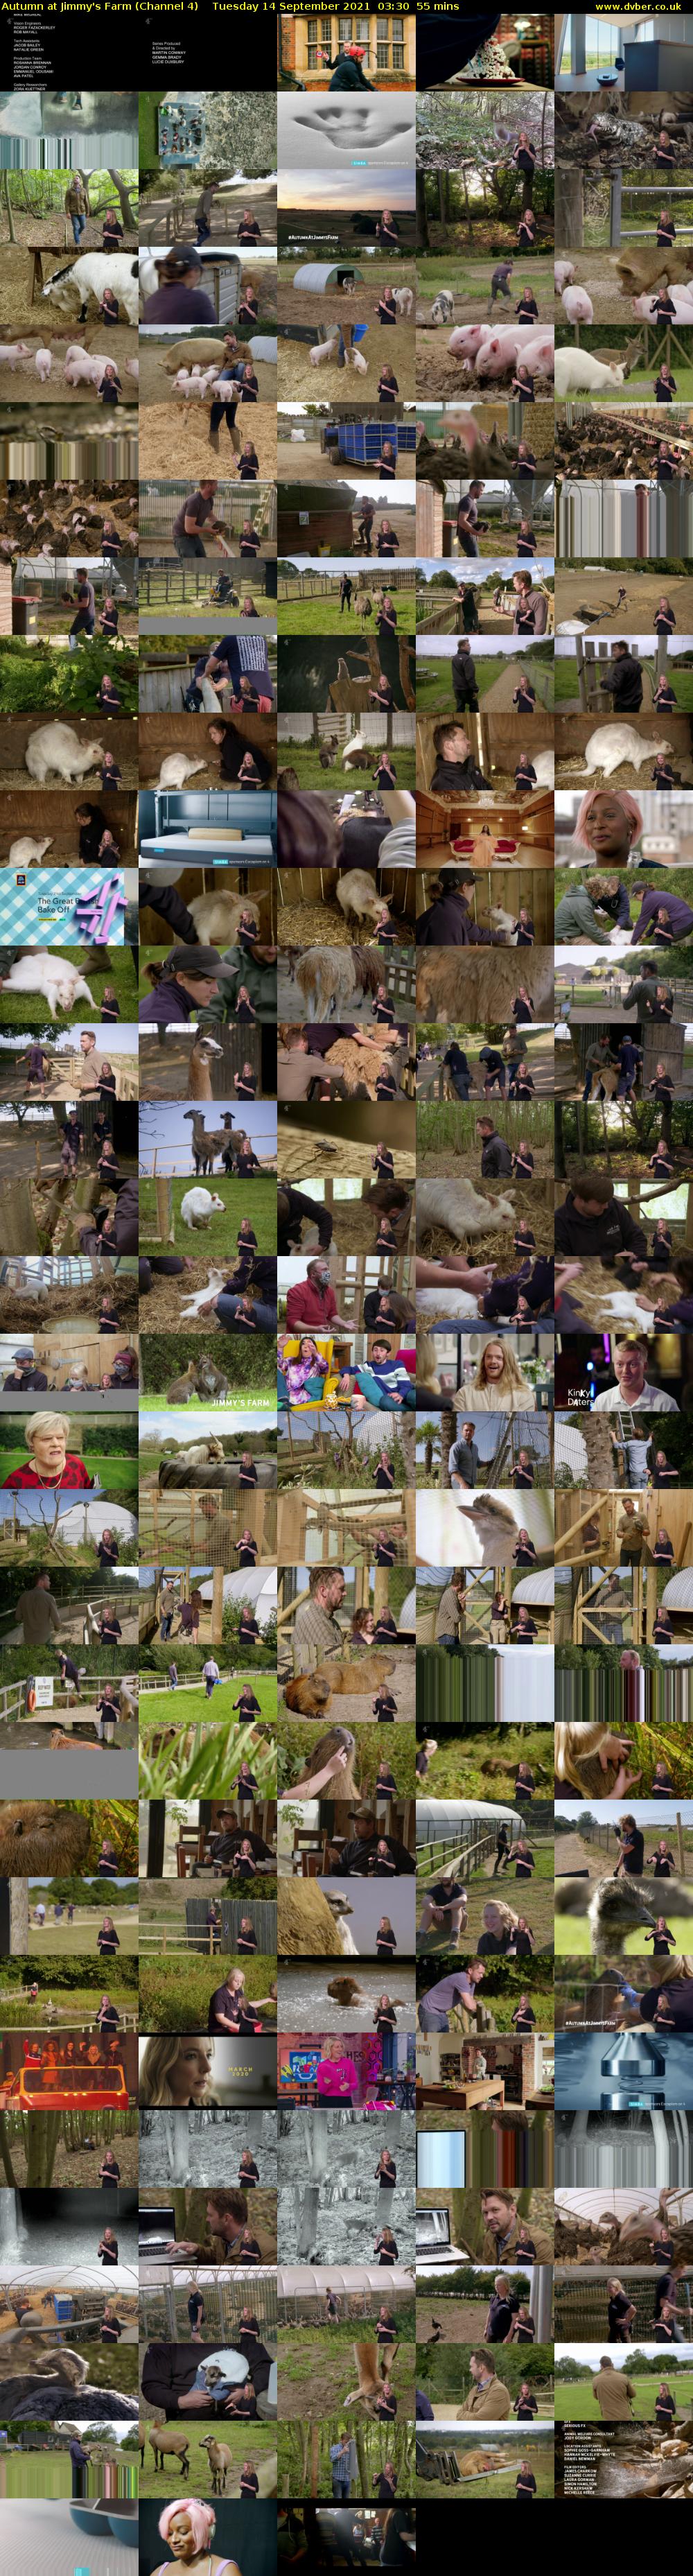 Autumn at Jimmy's Farm (Channel 4) Tuesday 14 September 2021 03:30 - 04:25